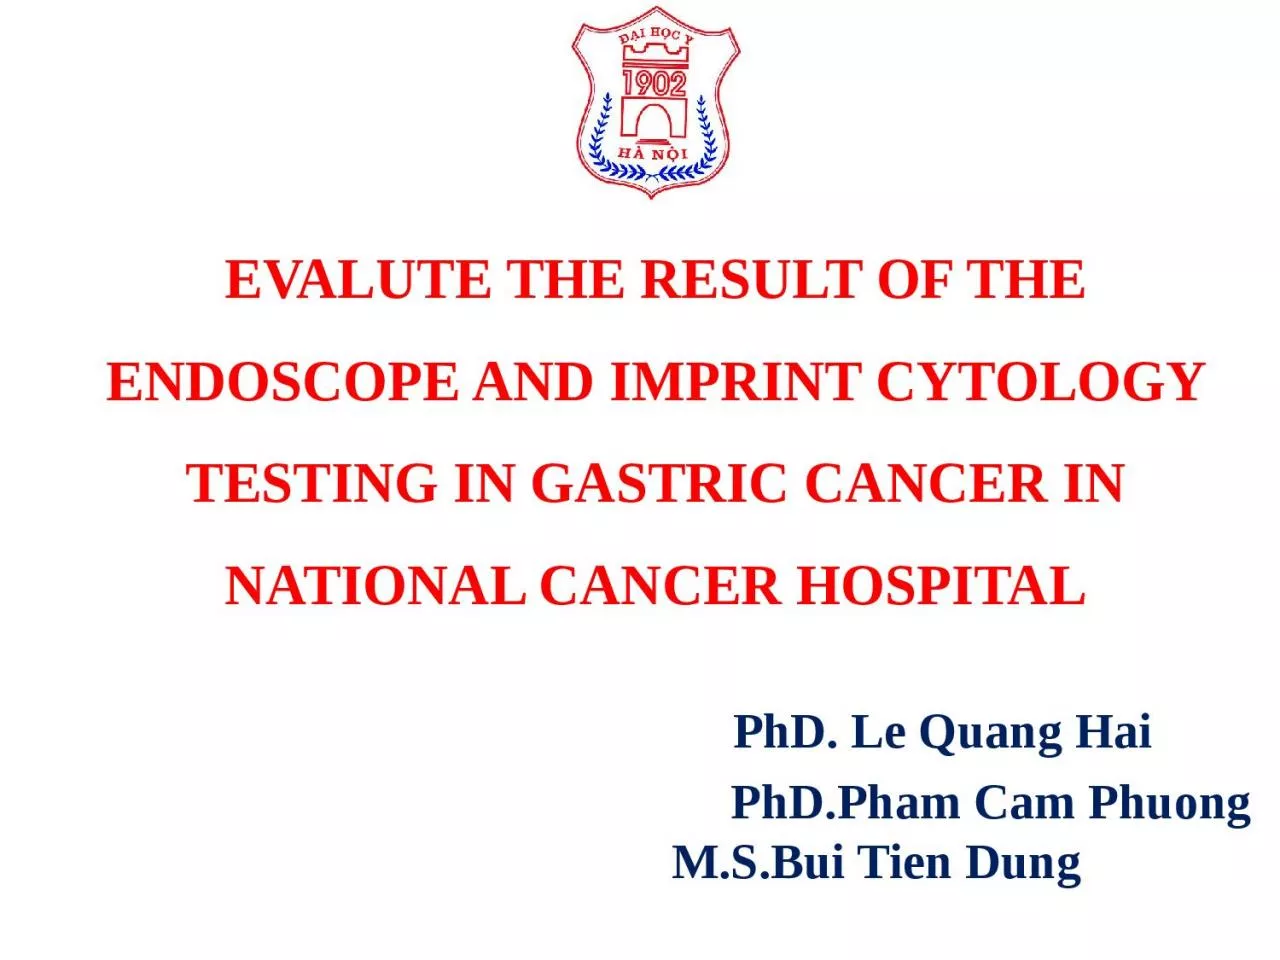 EVALUTE THE RESULT OF THE ENDOSCOPE AND IMPRINT CYTOLOGY TESTING IN GASTRIC CANCER IN